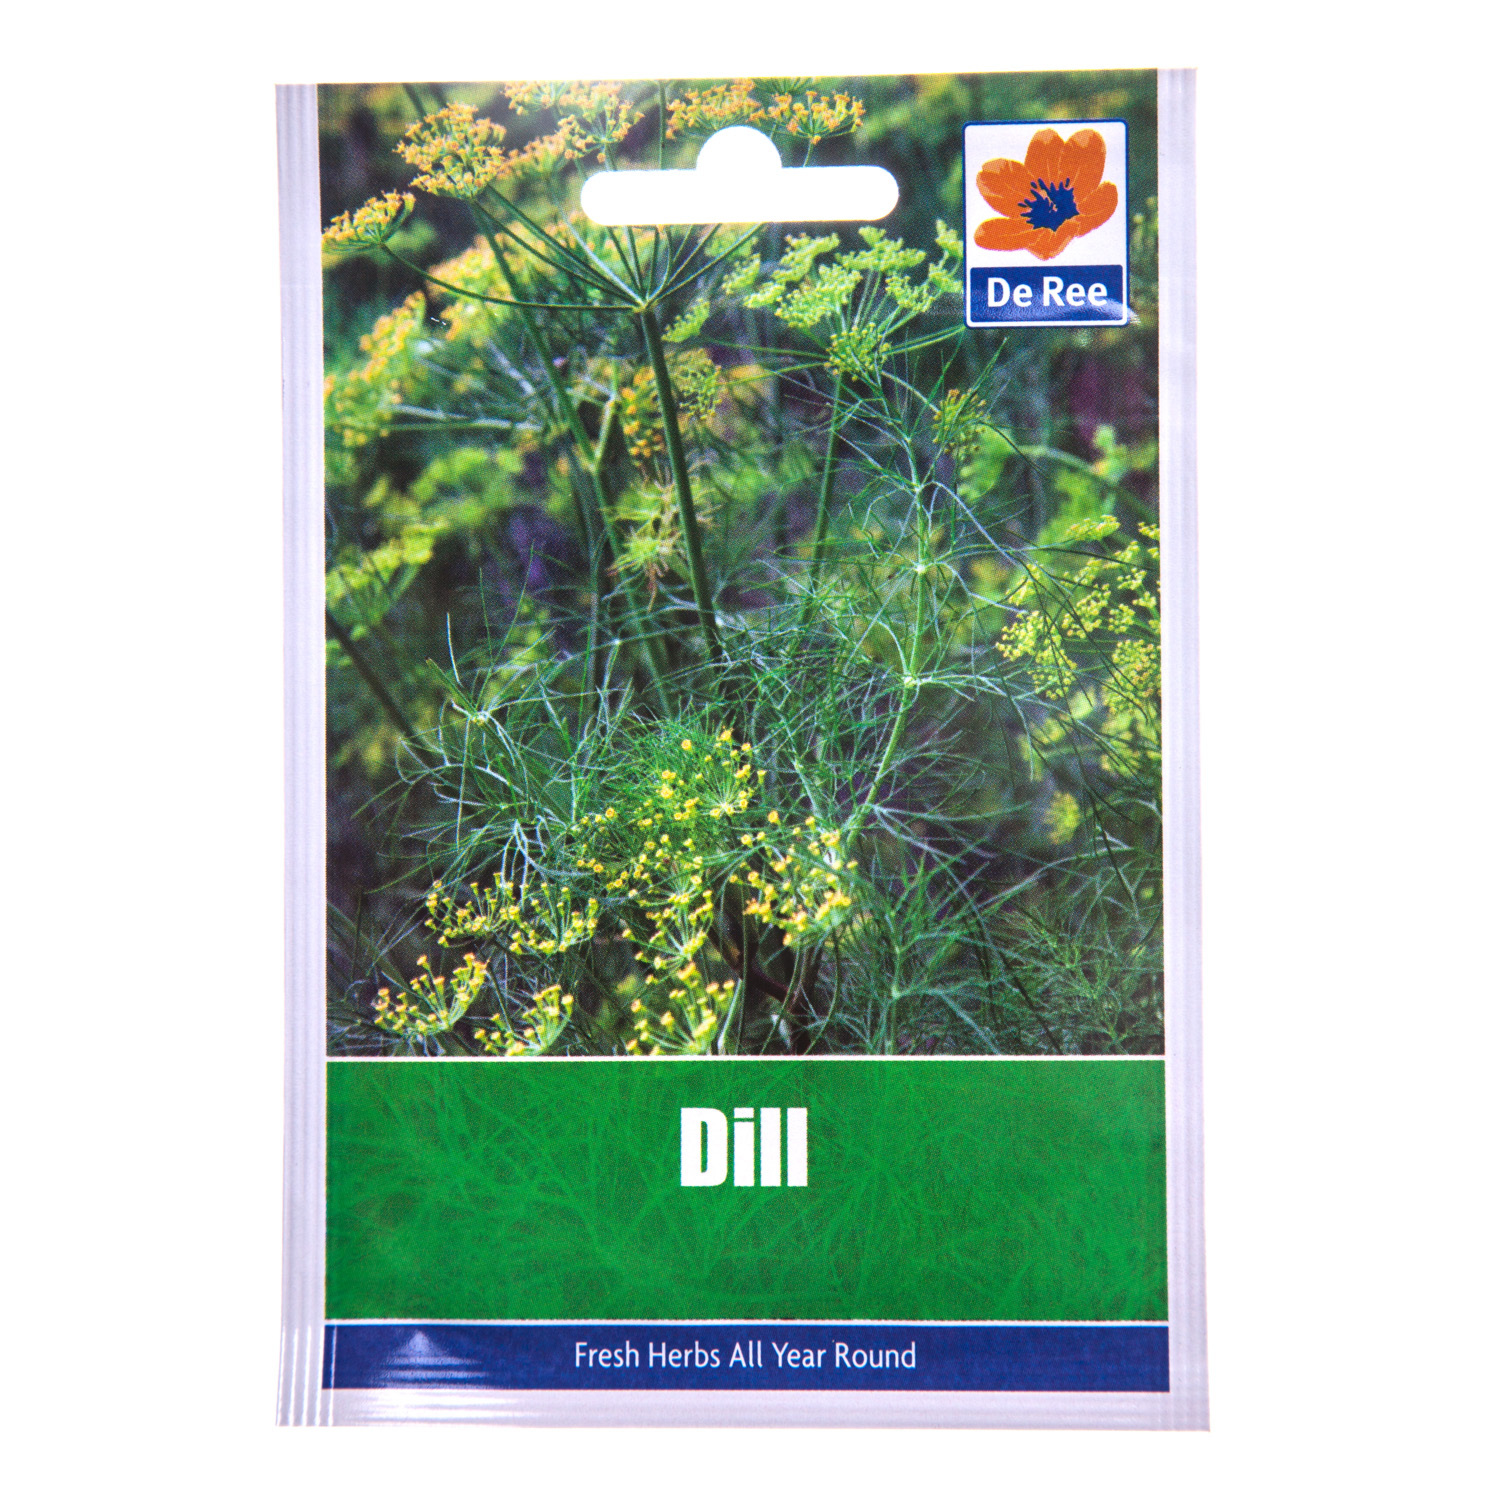 Dill Seed Packet Image